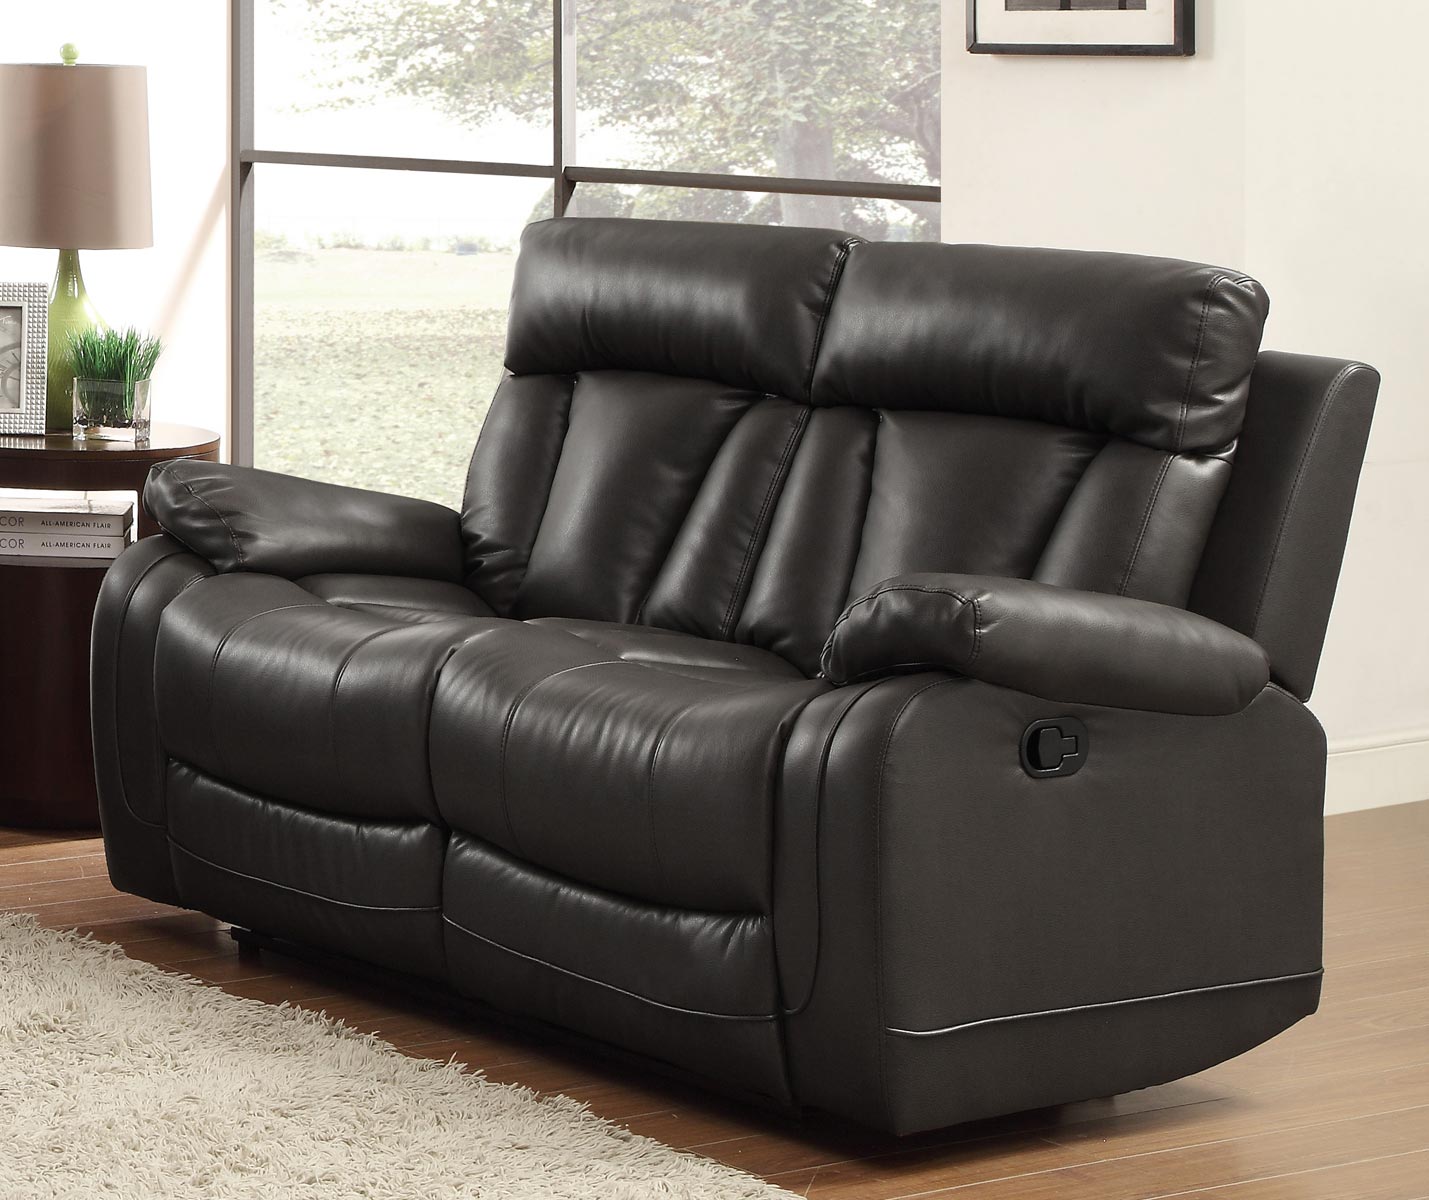 Homelegance Ackerman Double Reclining Love Seat - Black Bonded Leather Match